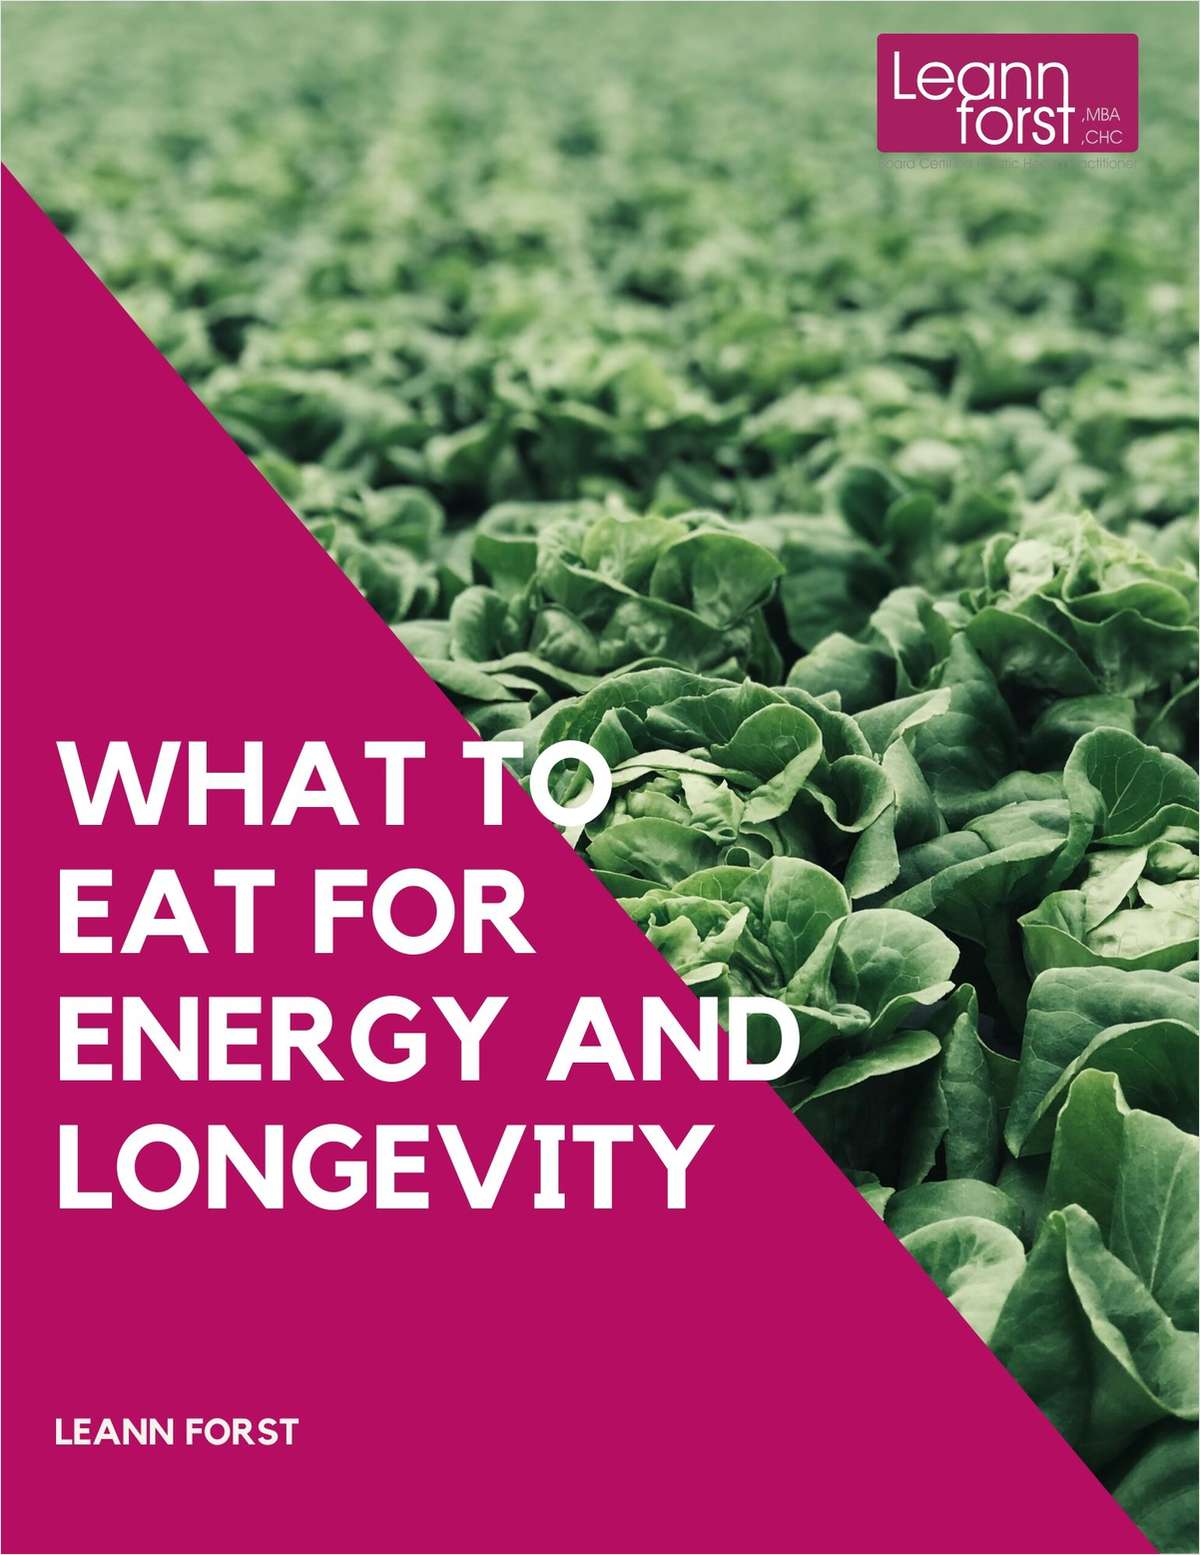 What to Eat for Energy and Longevity